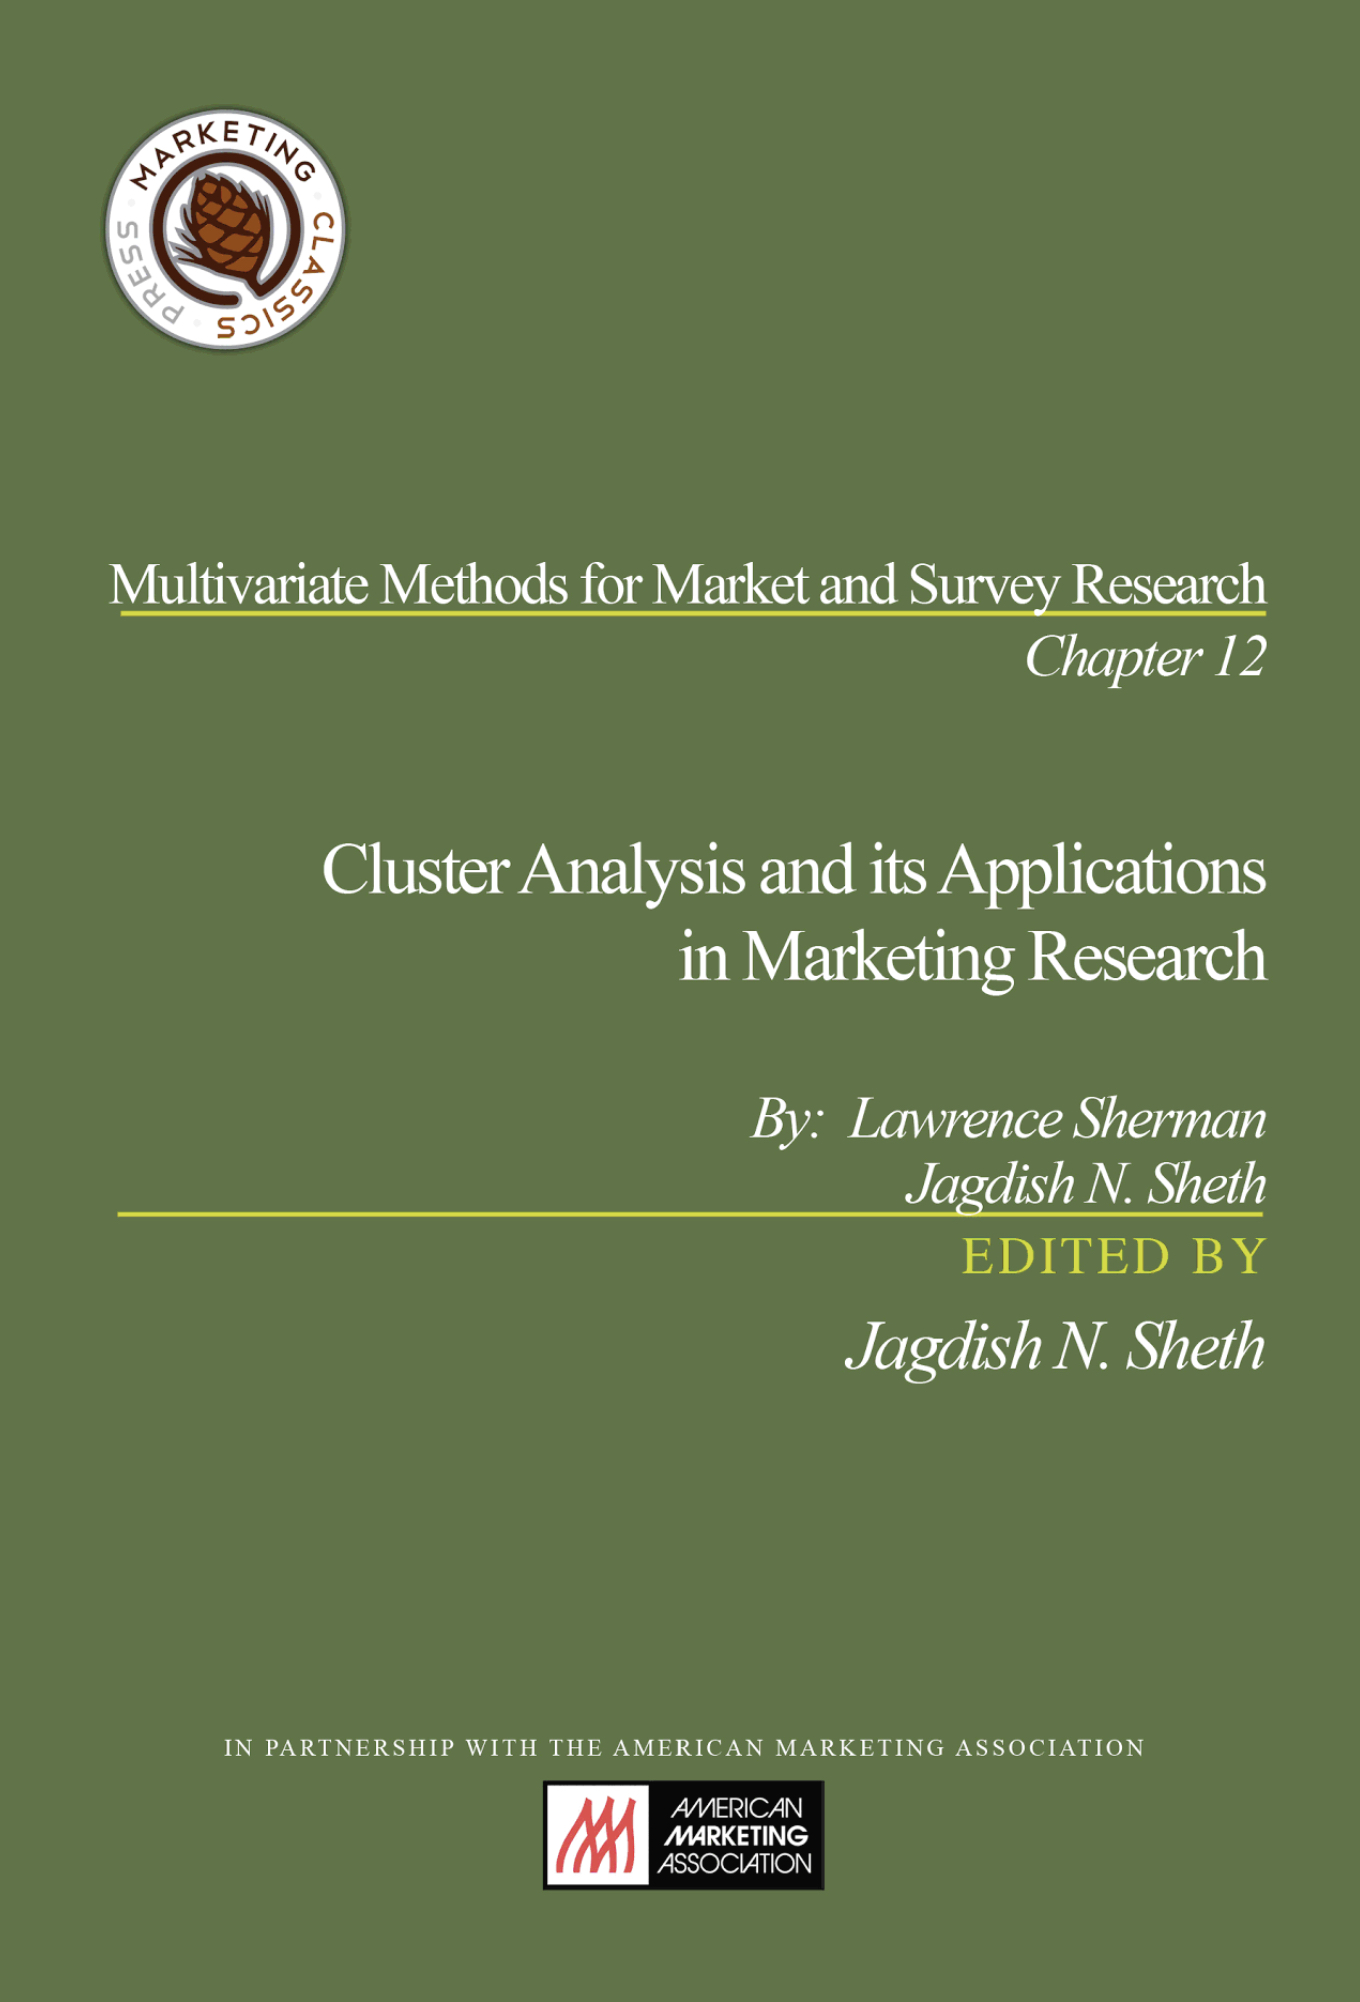 Cluster Analysis and its Applications in Marketing Research